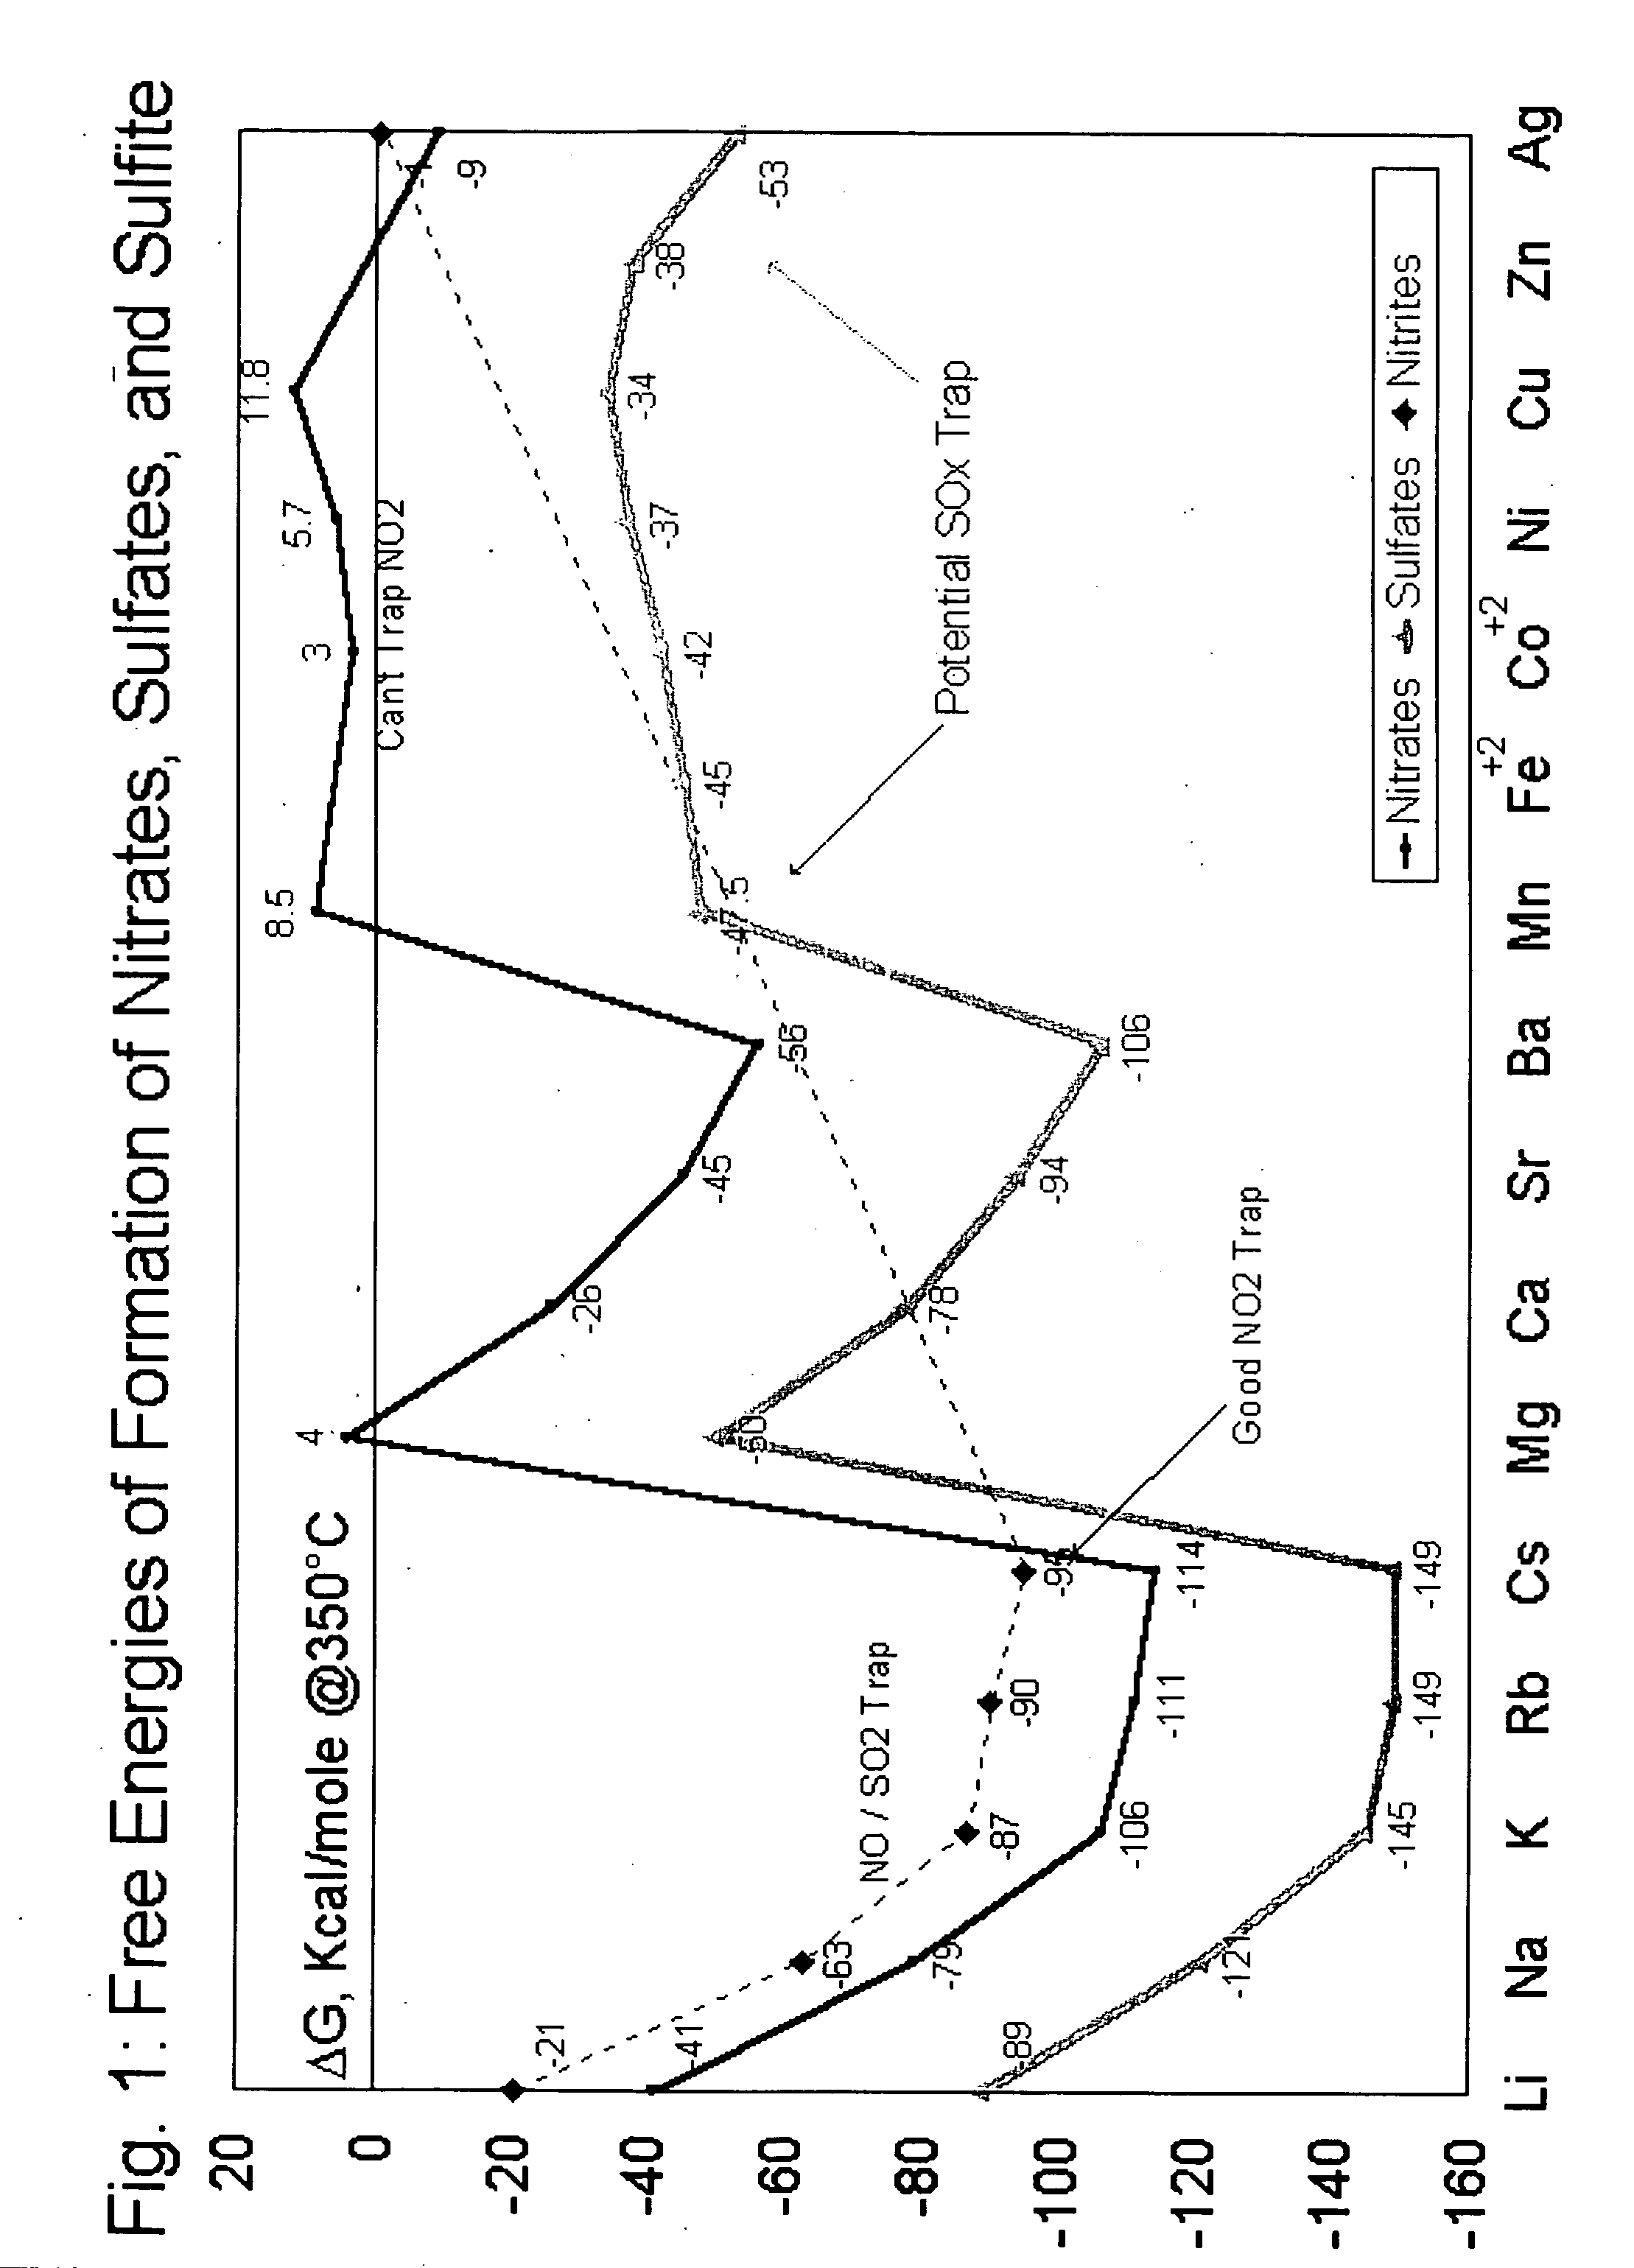 Layered SOx tolerant NOx trap catalysts and methods of making and using the same